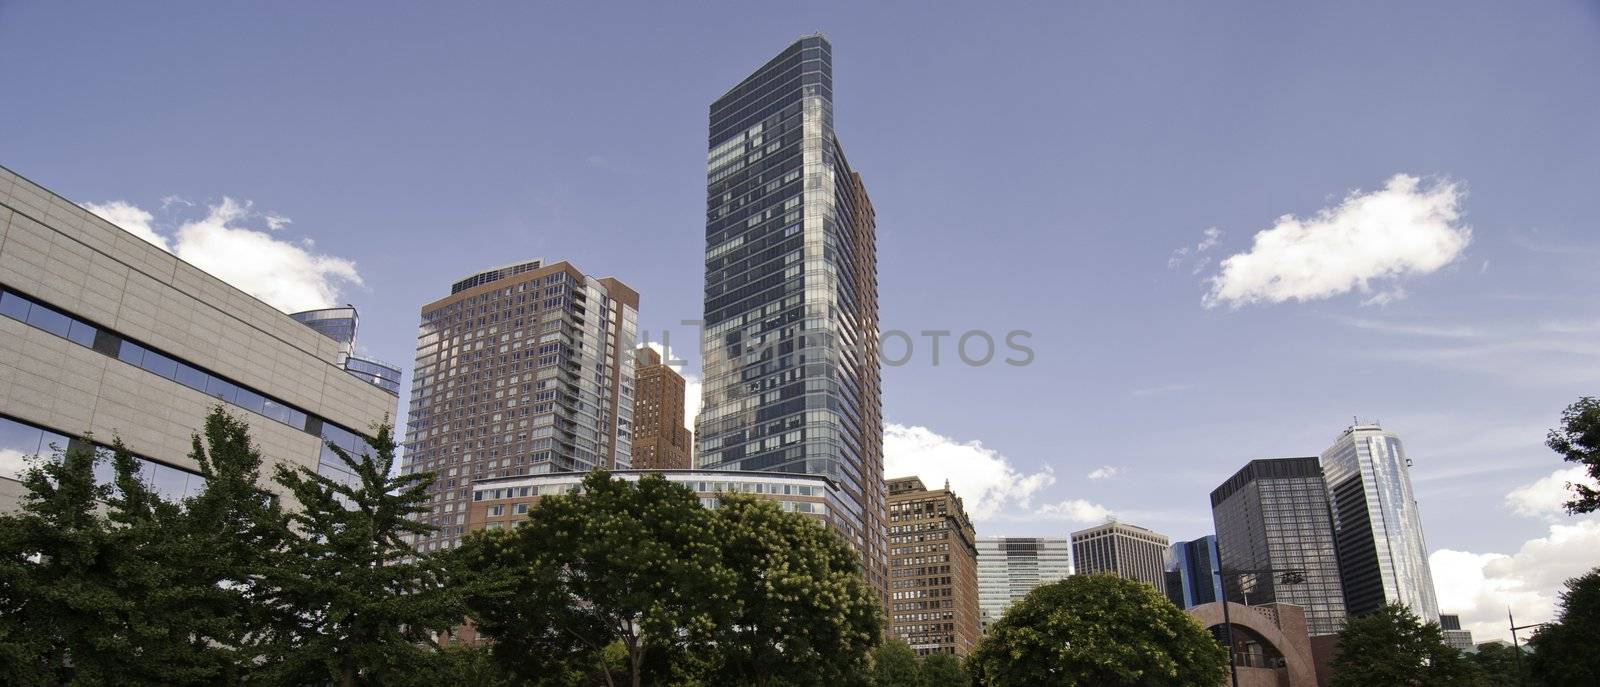 Panoramic View of New York City Buildings by jovannig